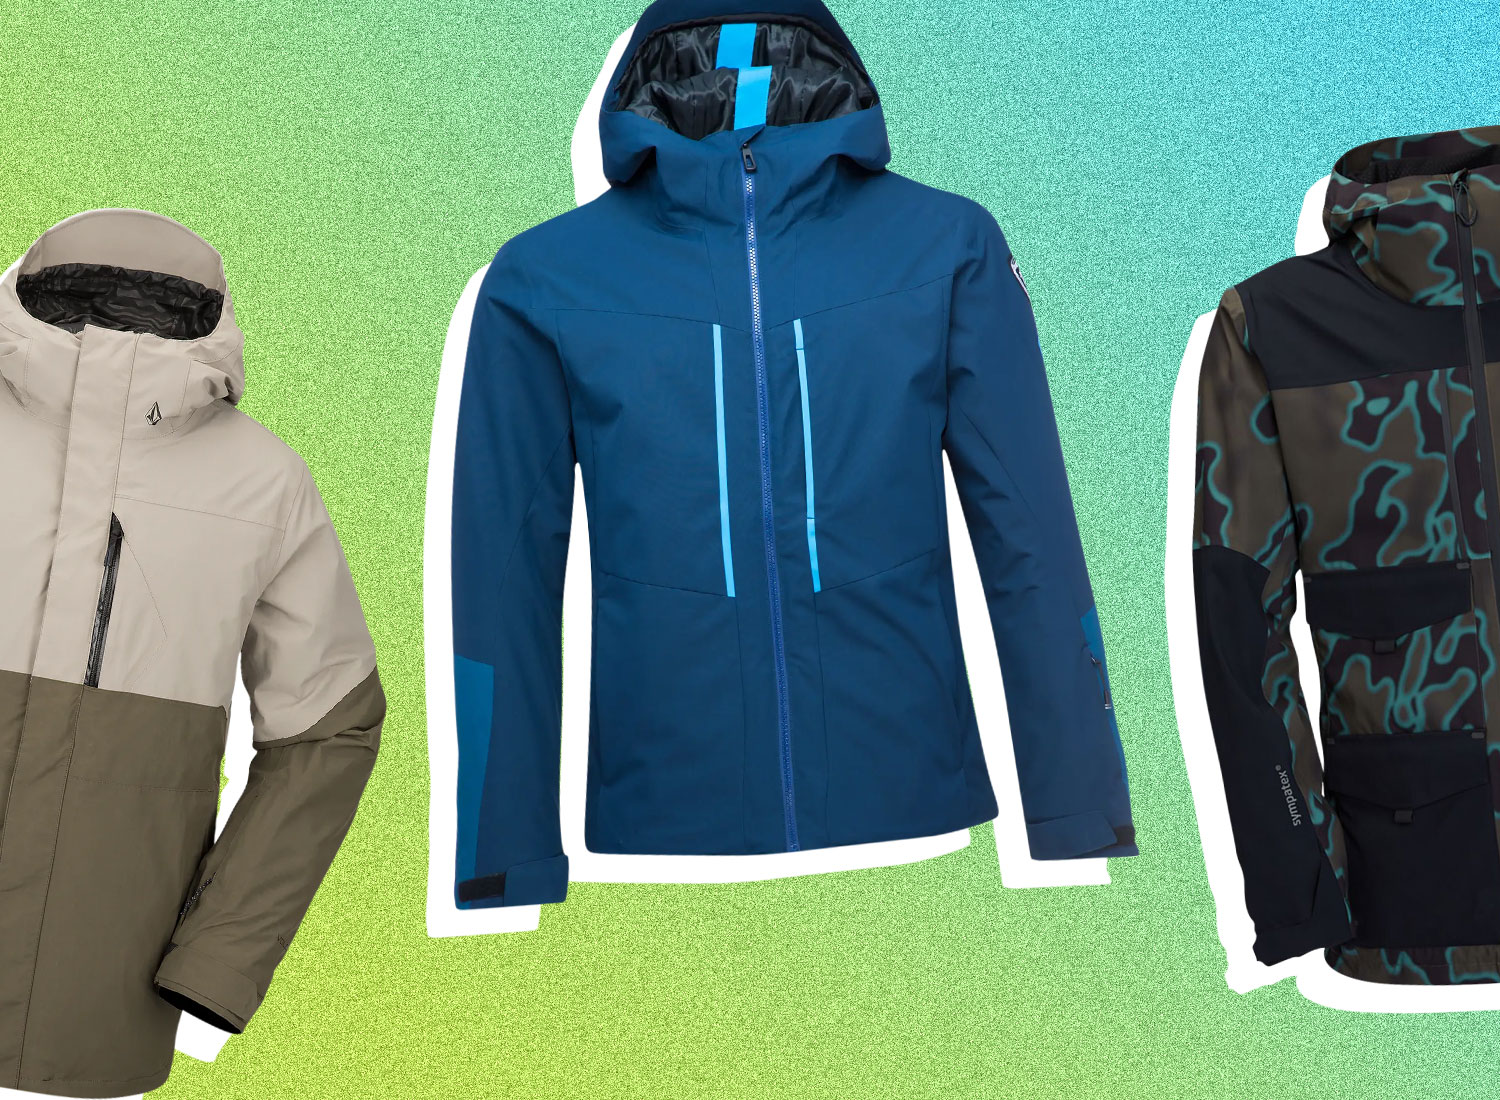 20 Best Snowboard Jackets To Shred In Style In 2023